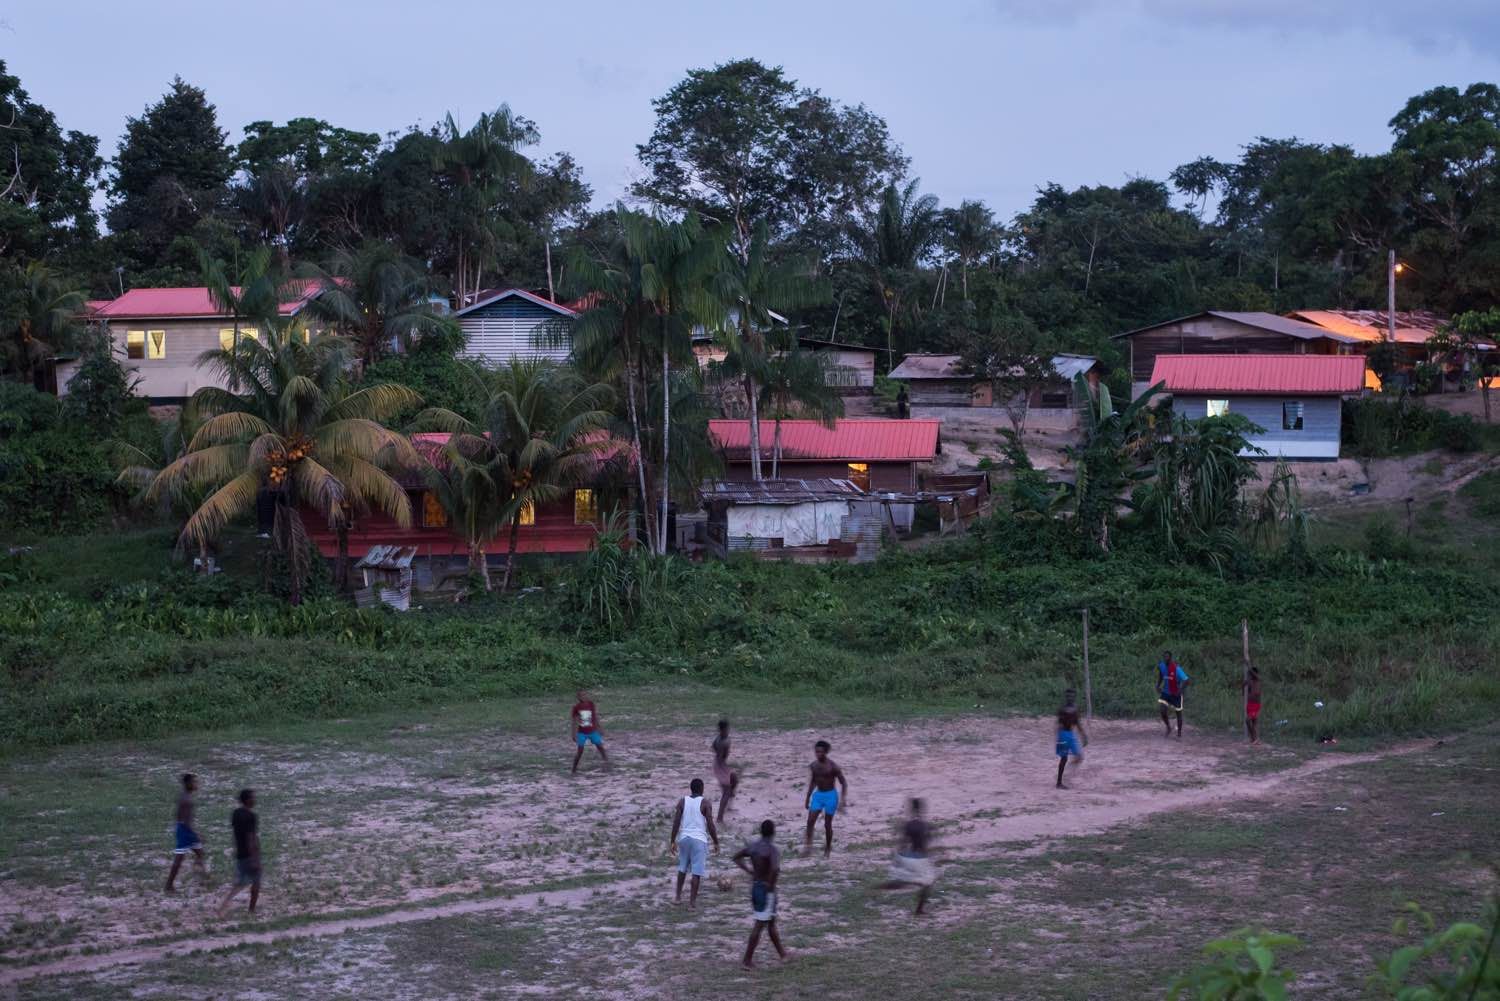 People play soccer as dusk falls on the village of Adjuma Kondre in Suriname. The village's water sources have been impacted by Alcoa's nearby mining operations. Image by Stephanie Strasburg. Suriname, 2017.